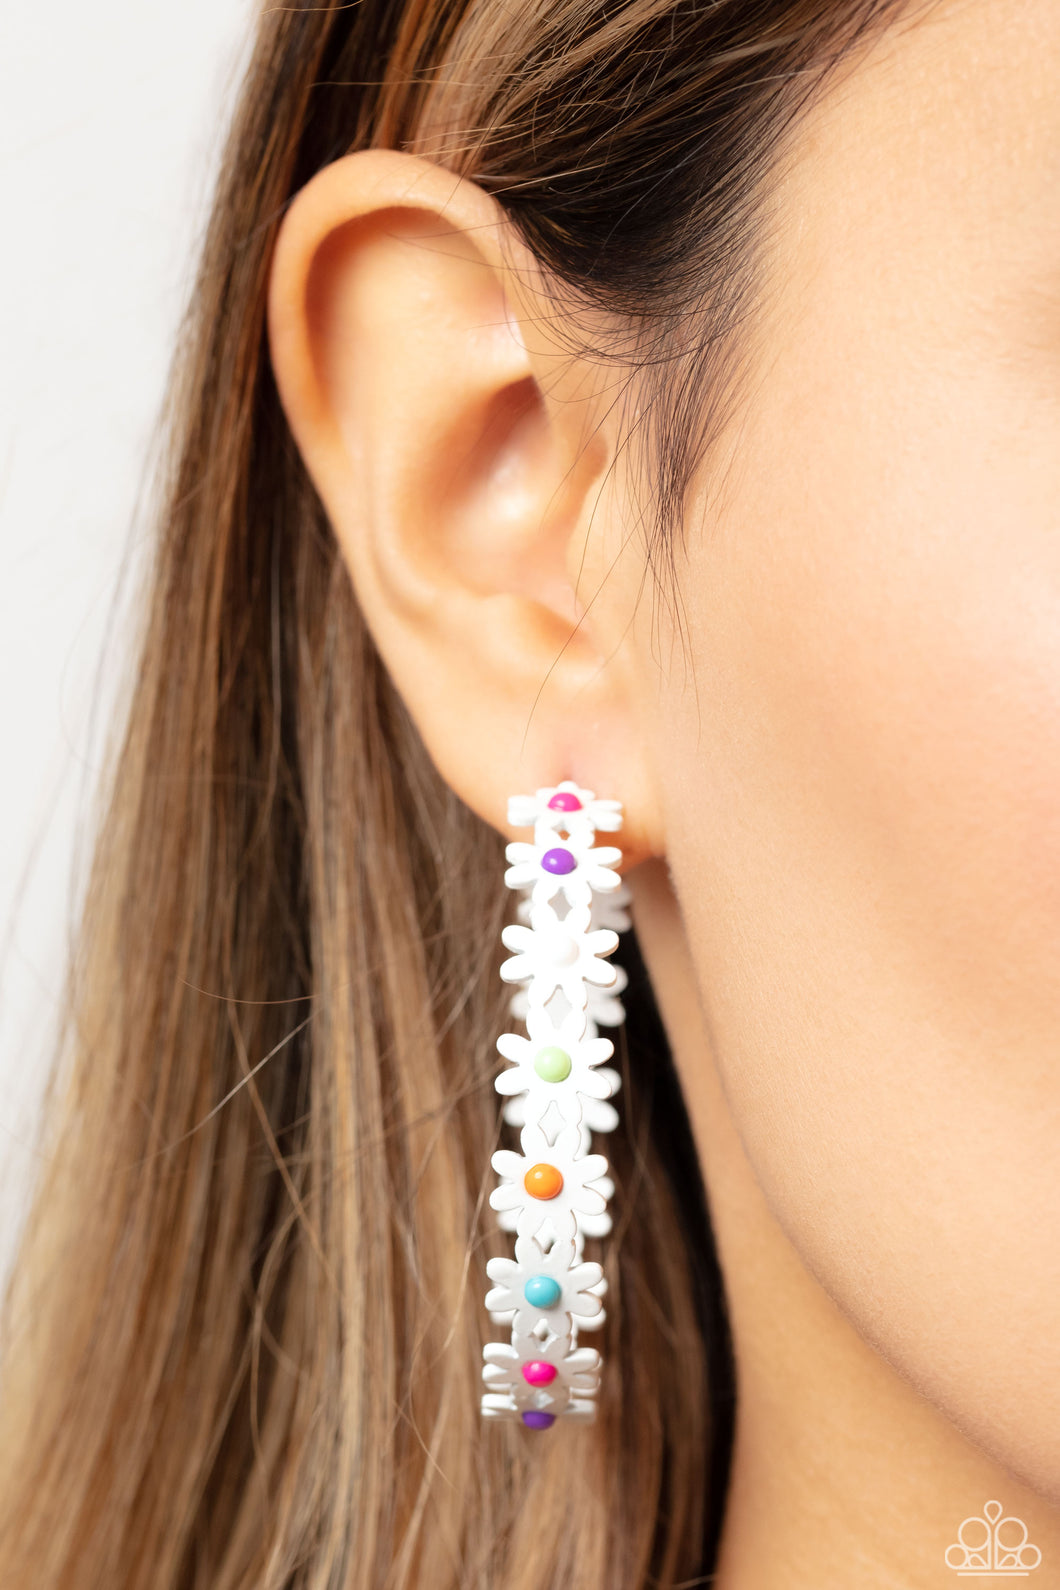 A dainty collection of white daisies with white, orange, green, blue, pink, and purple centers blooms into a free-spirited hoop around the ear. Earring attaches to a standard post fitting. Hoop measures approximately 2